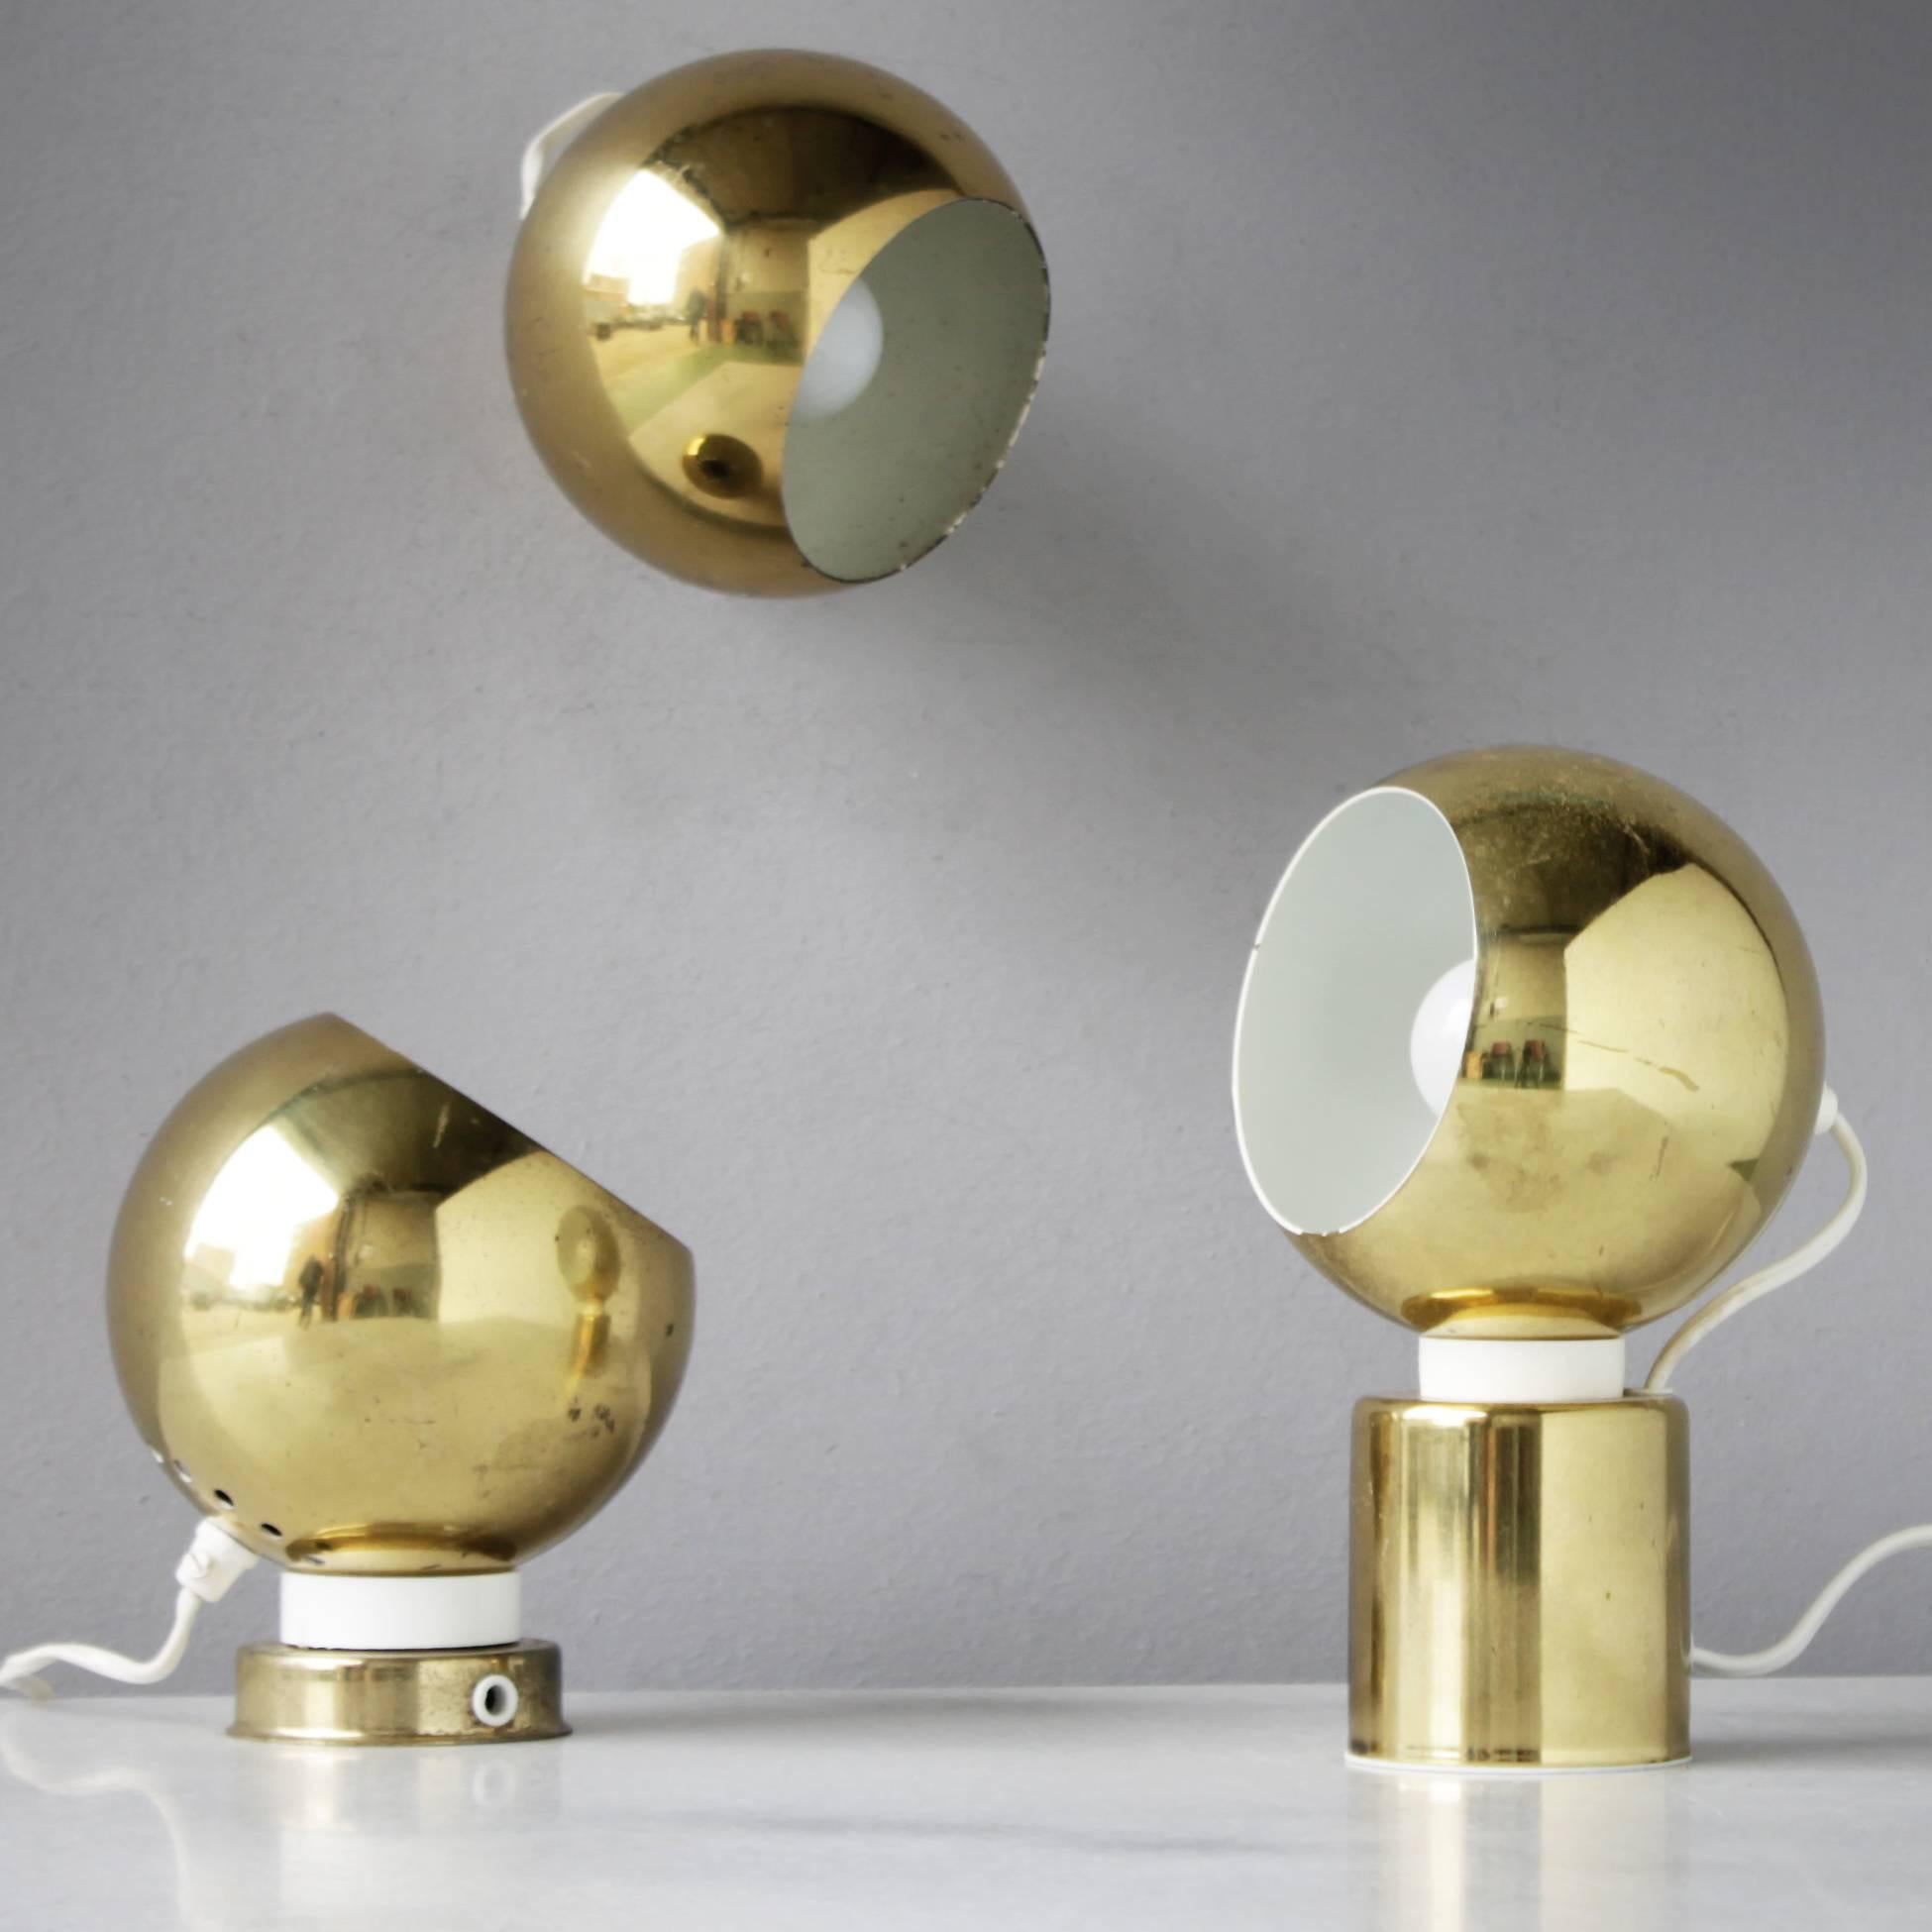 Two (2) wall lights and one (1) table light by Goffredo Reggiani for Reggiani Lampadari. Very rare in brass. The adjustable ball is on a magnetic base. It's all in a good working condition, just some stains on the height of the magnet. Measurements